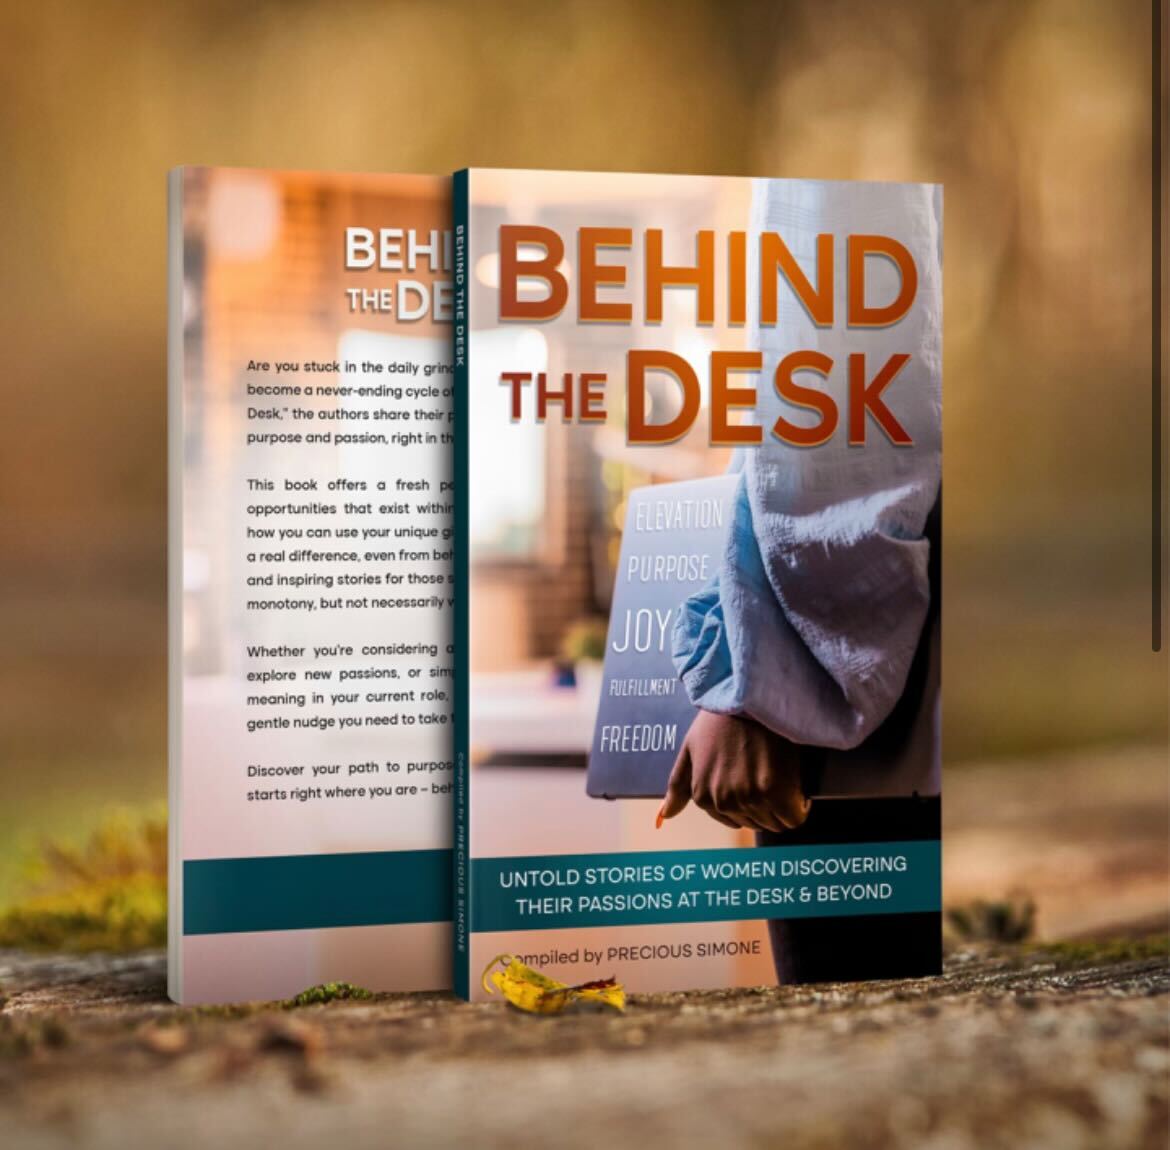 "Behind the Desk" Book